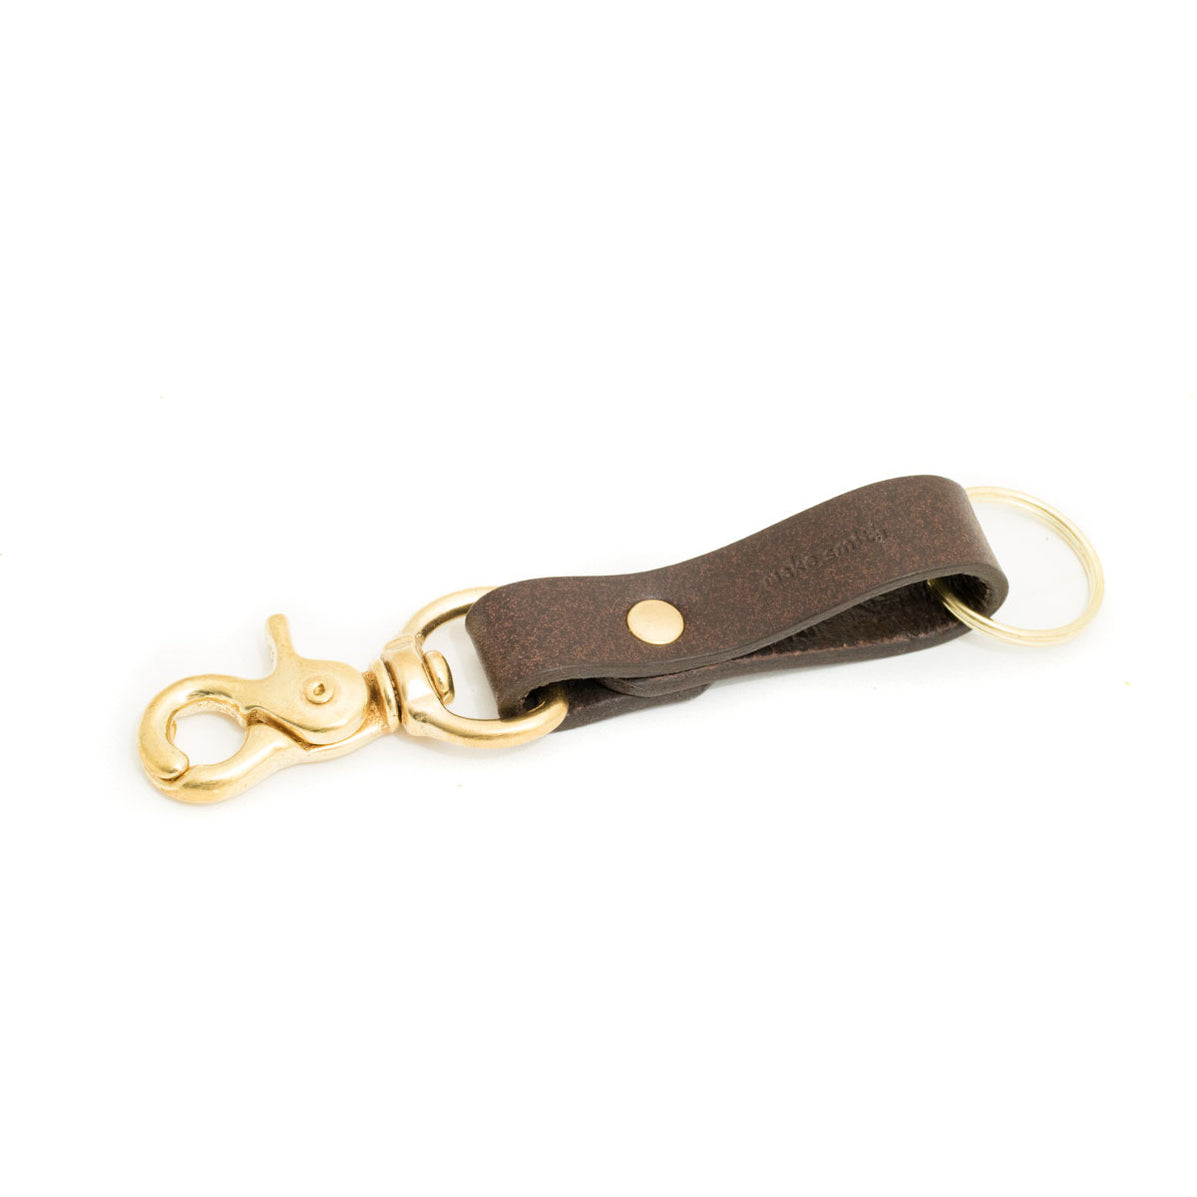 LEATHER KEY CHAIN WITH CLIP :: Handmade in the USA by Make Smith ...